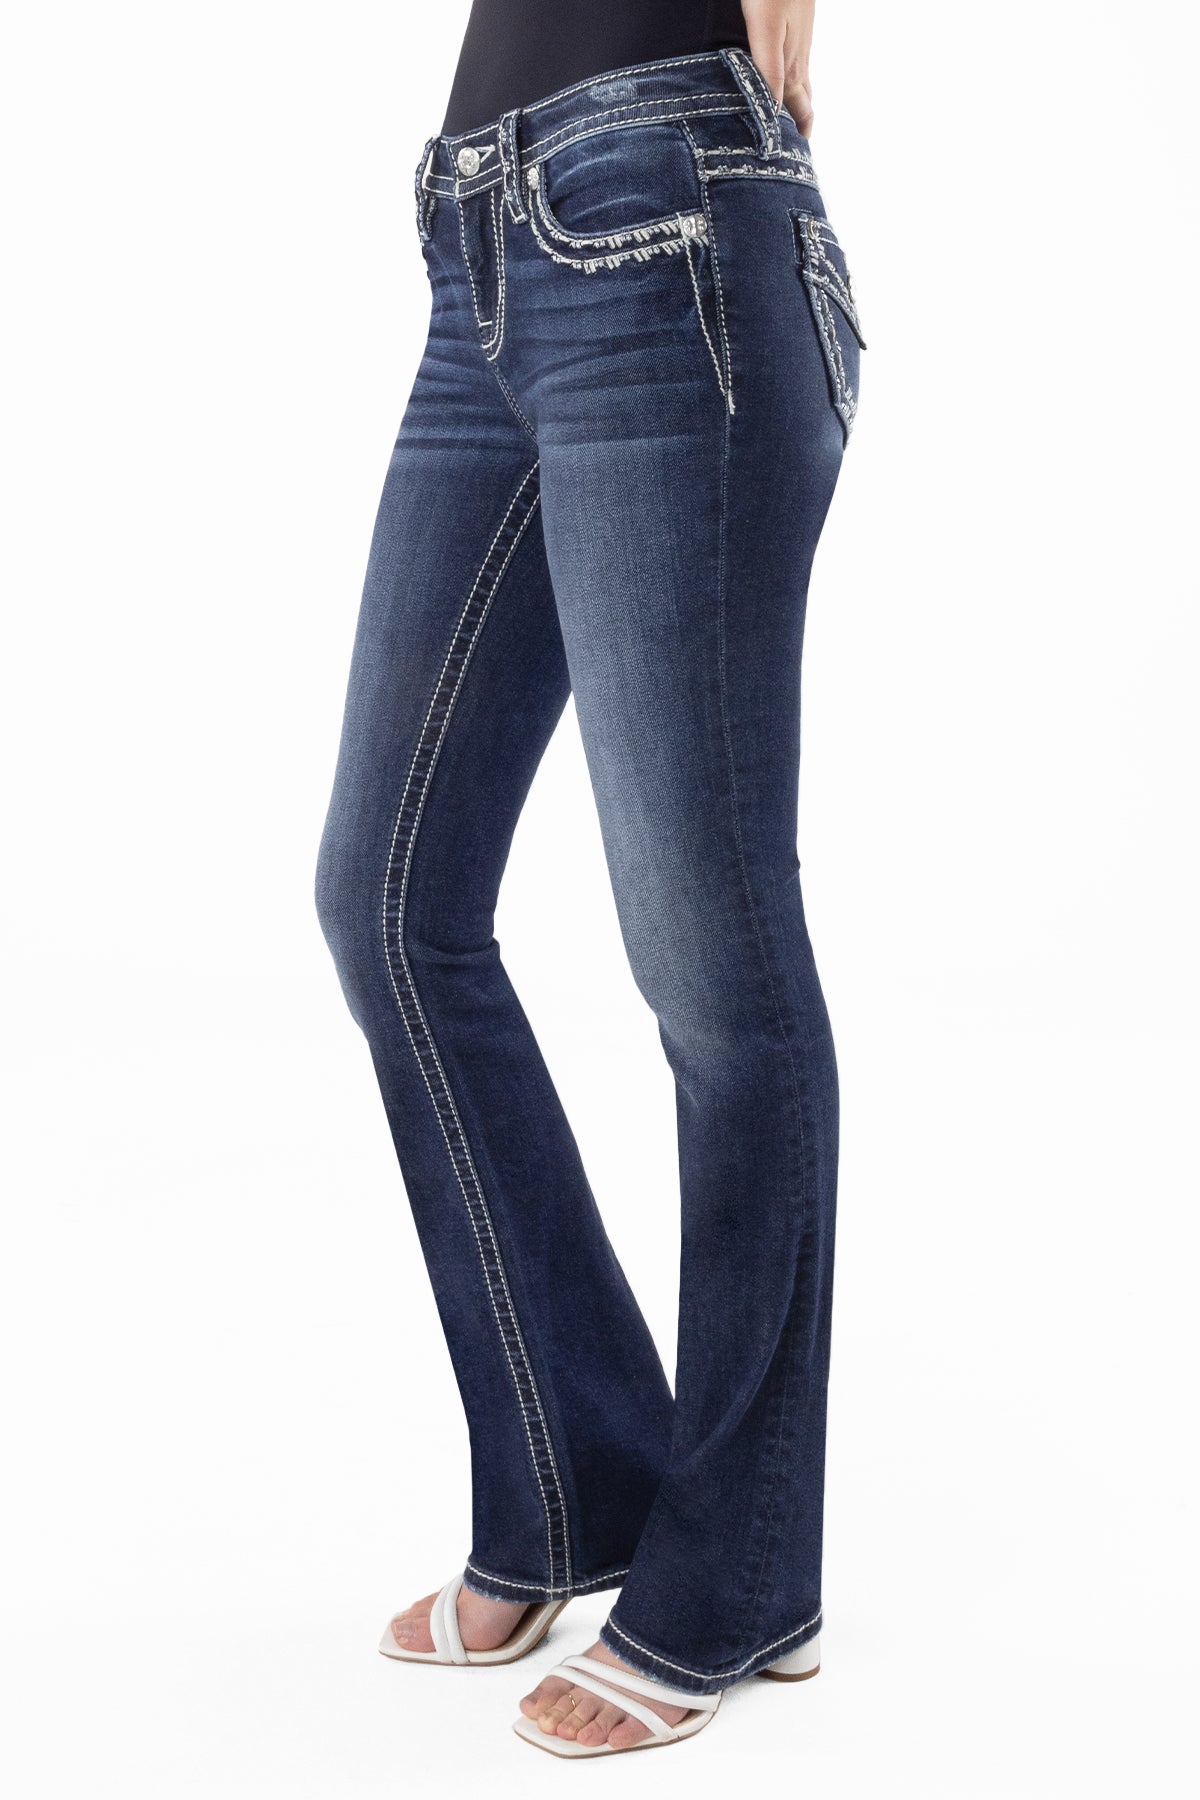 Sailey Women's Thick Stitch Bootcut Jeans